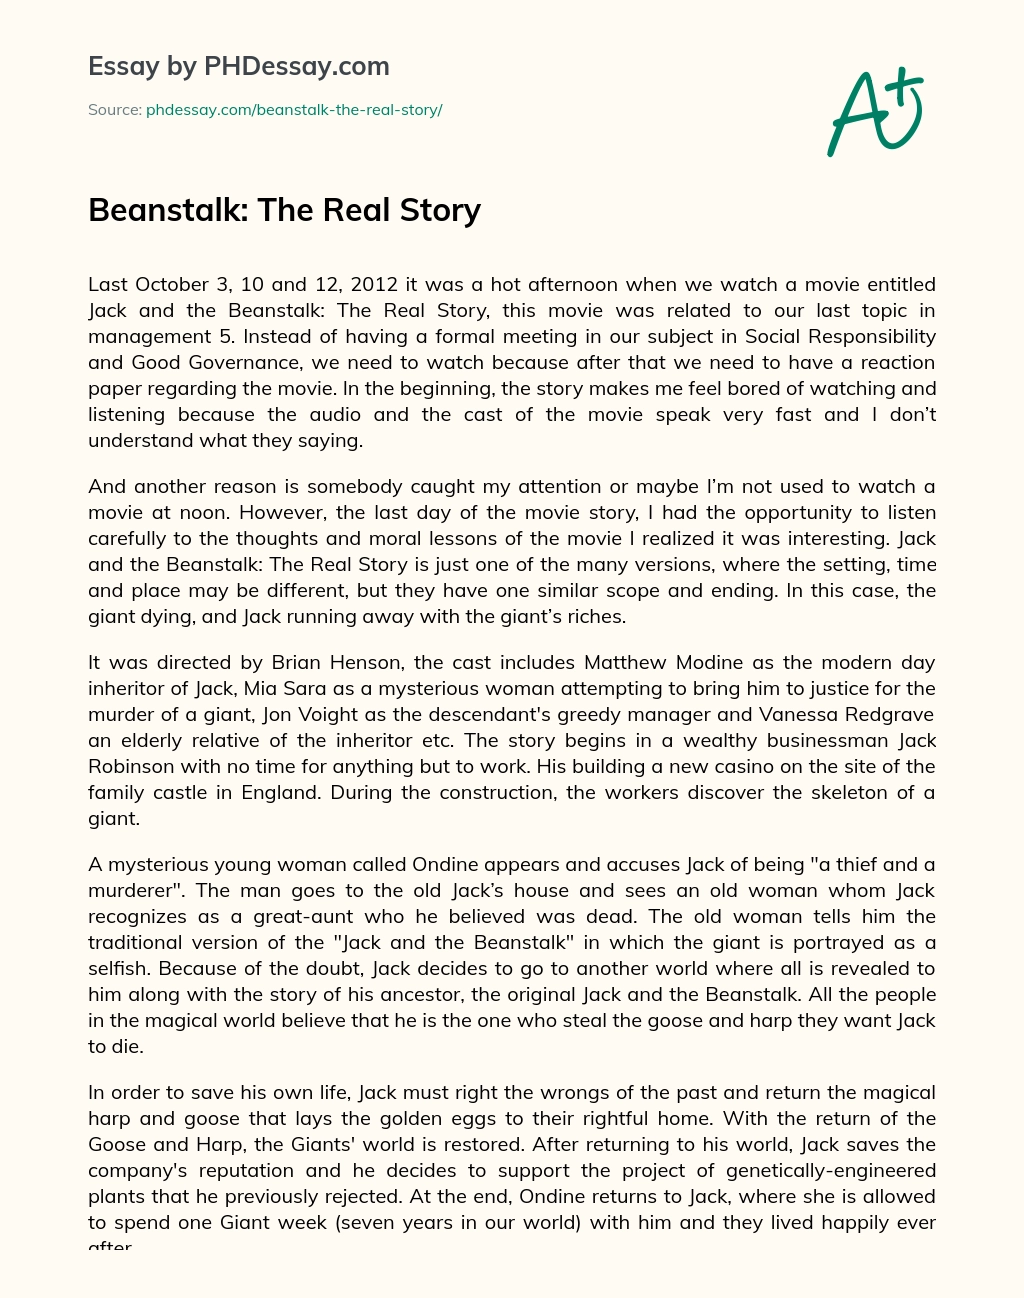 Beanstalk: The Real Story essay